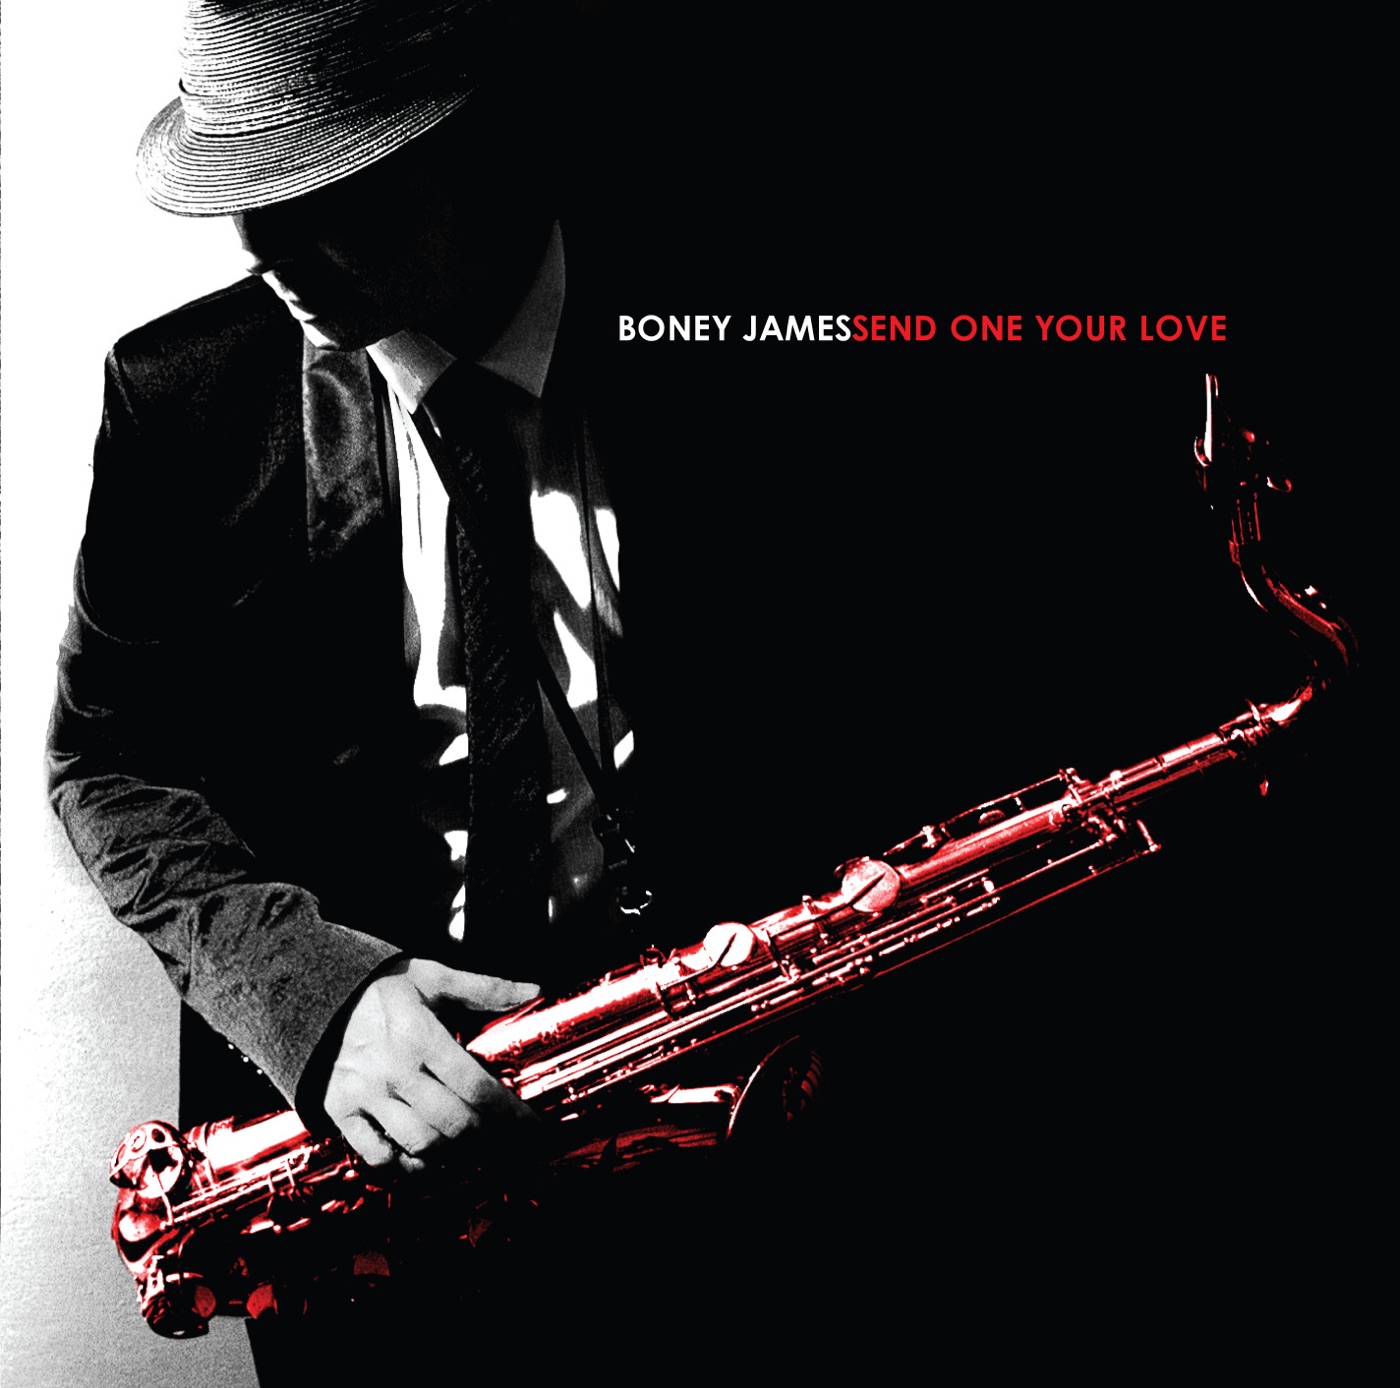 Send One Your Love by Boney James